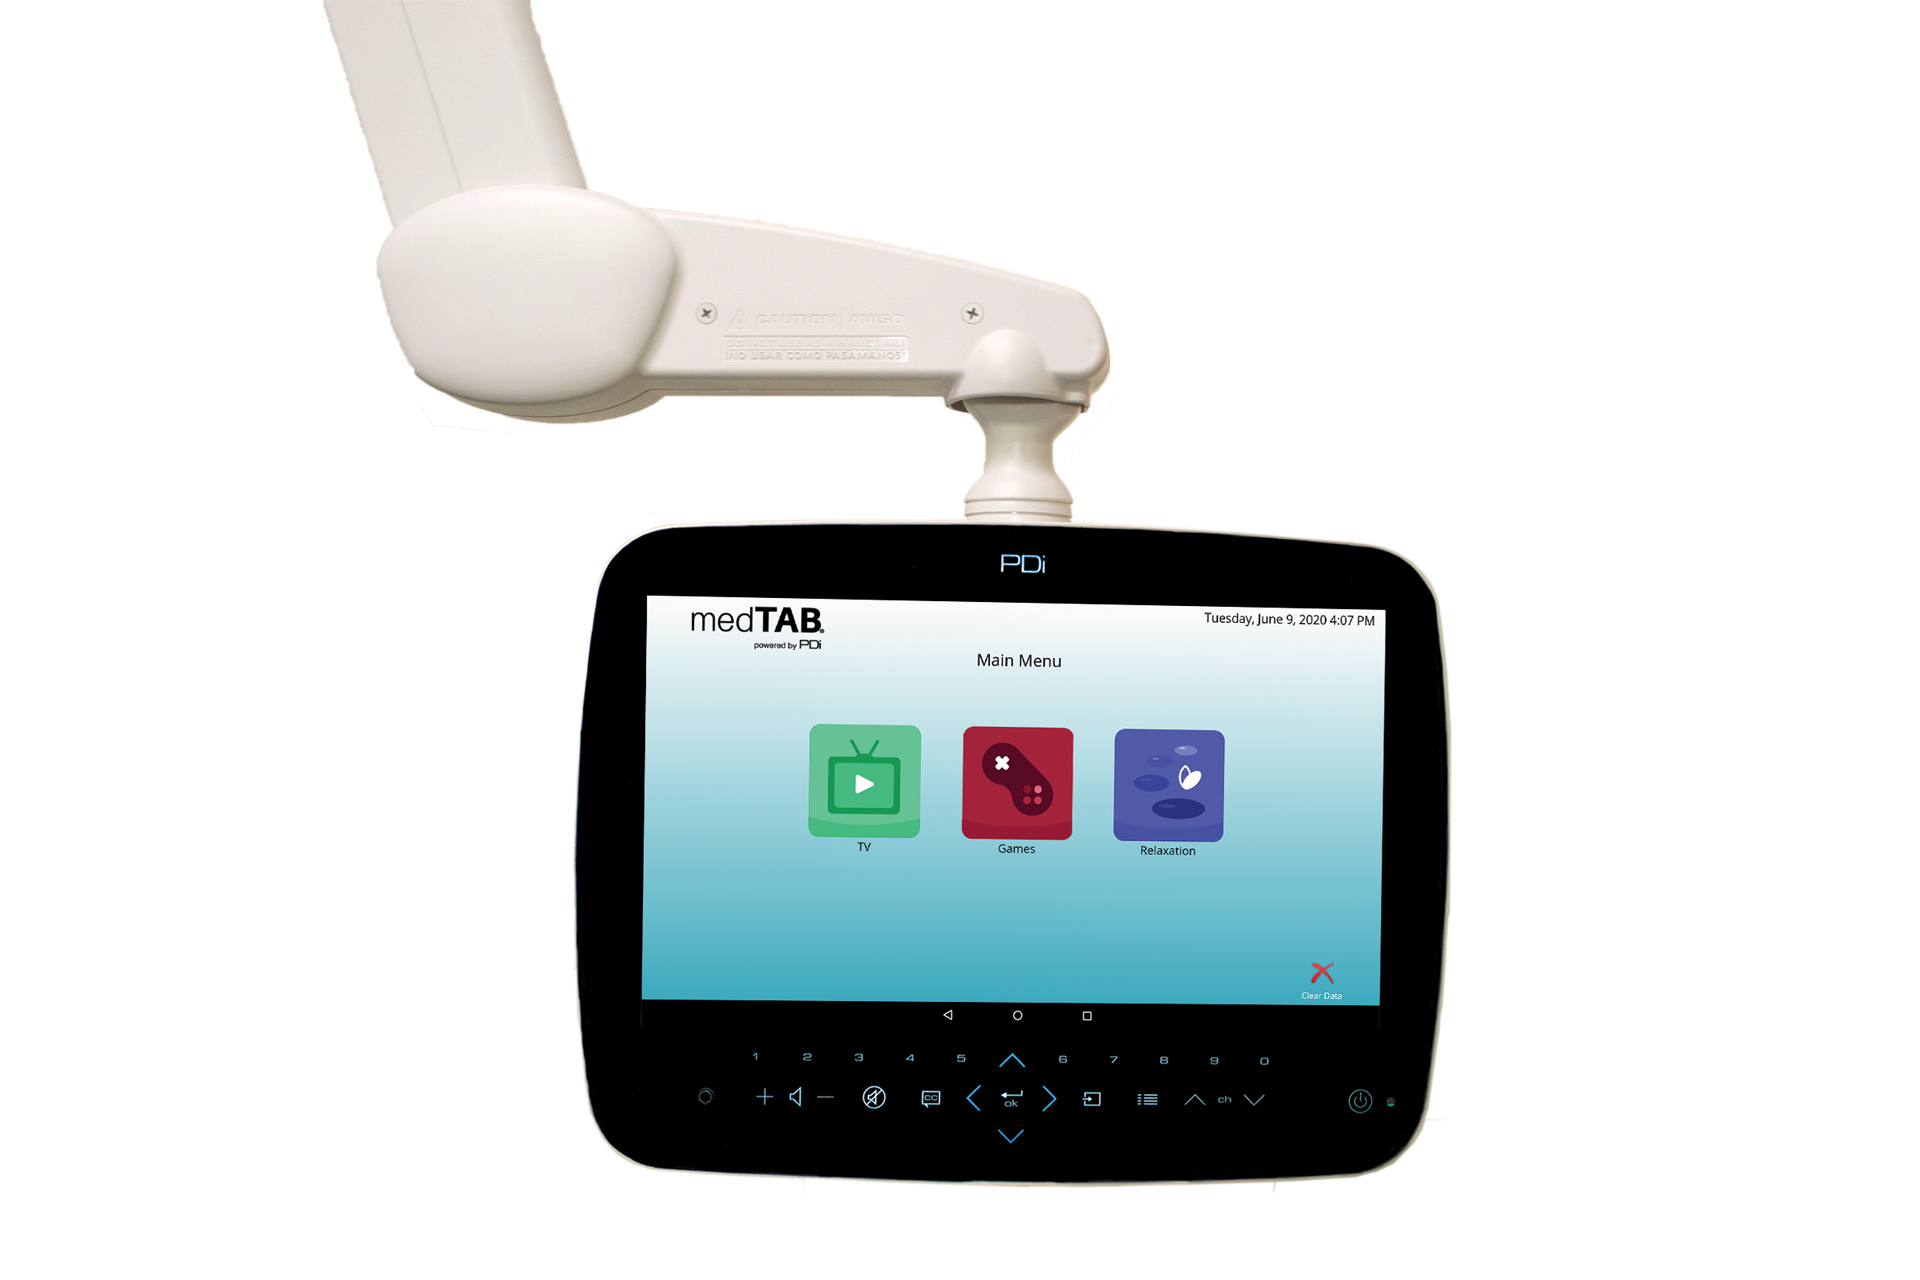 Product image of the medTAB14 healthcare television built by PDi Communication Systems, Inc. with three icons and no internet